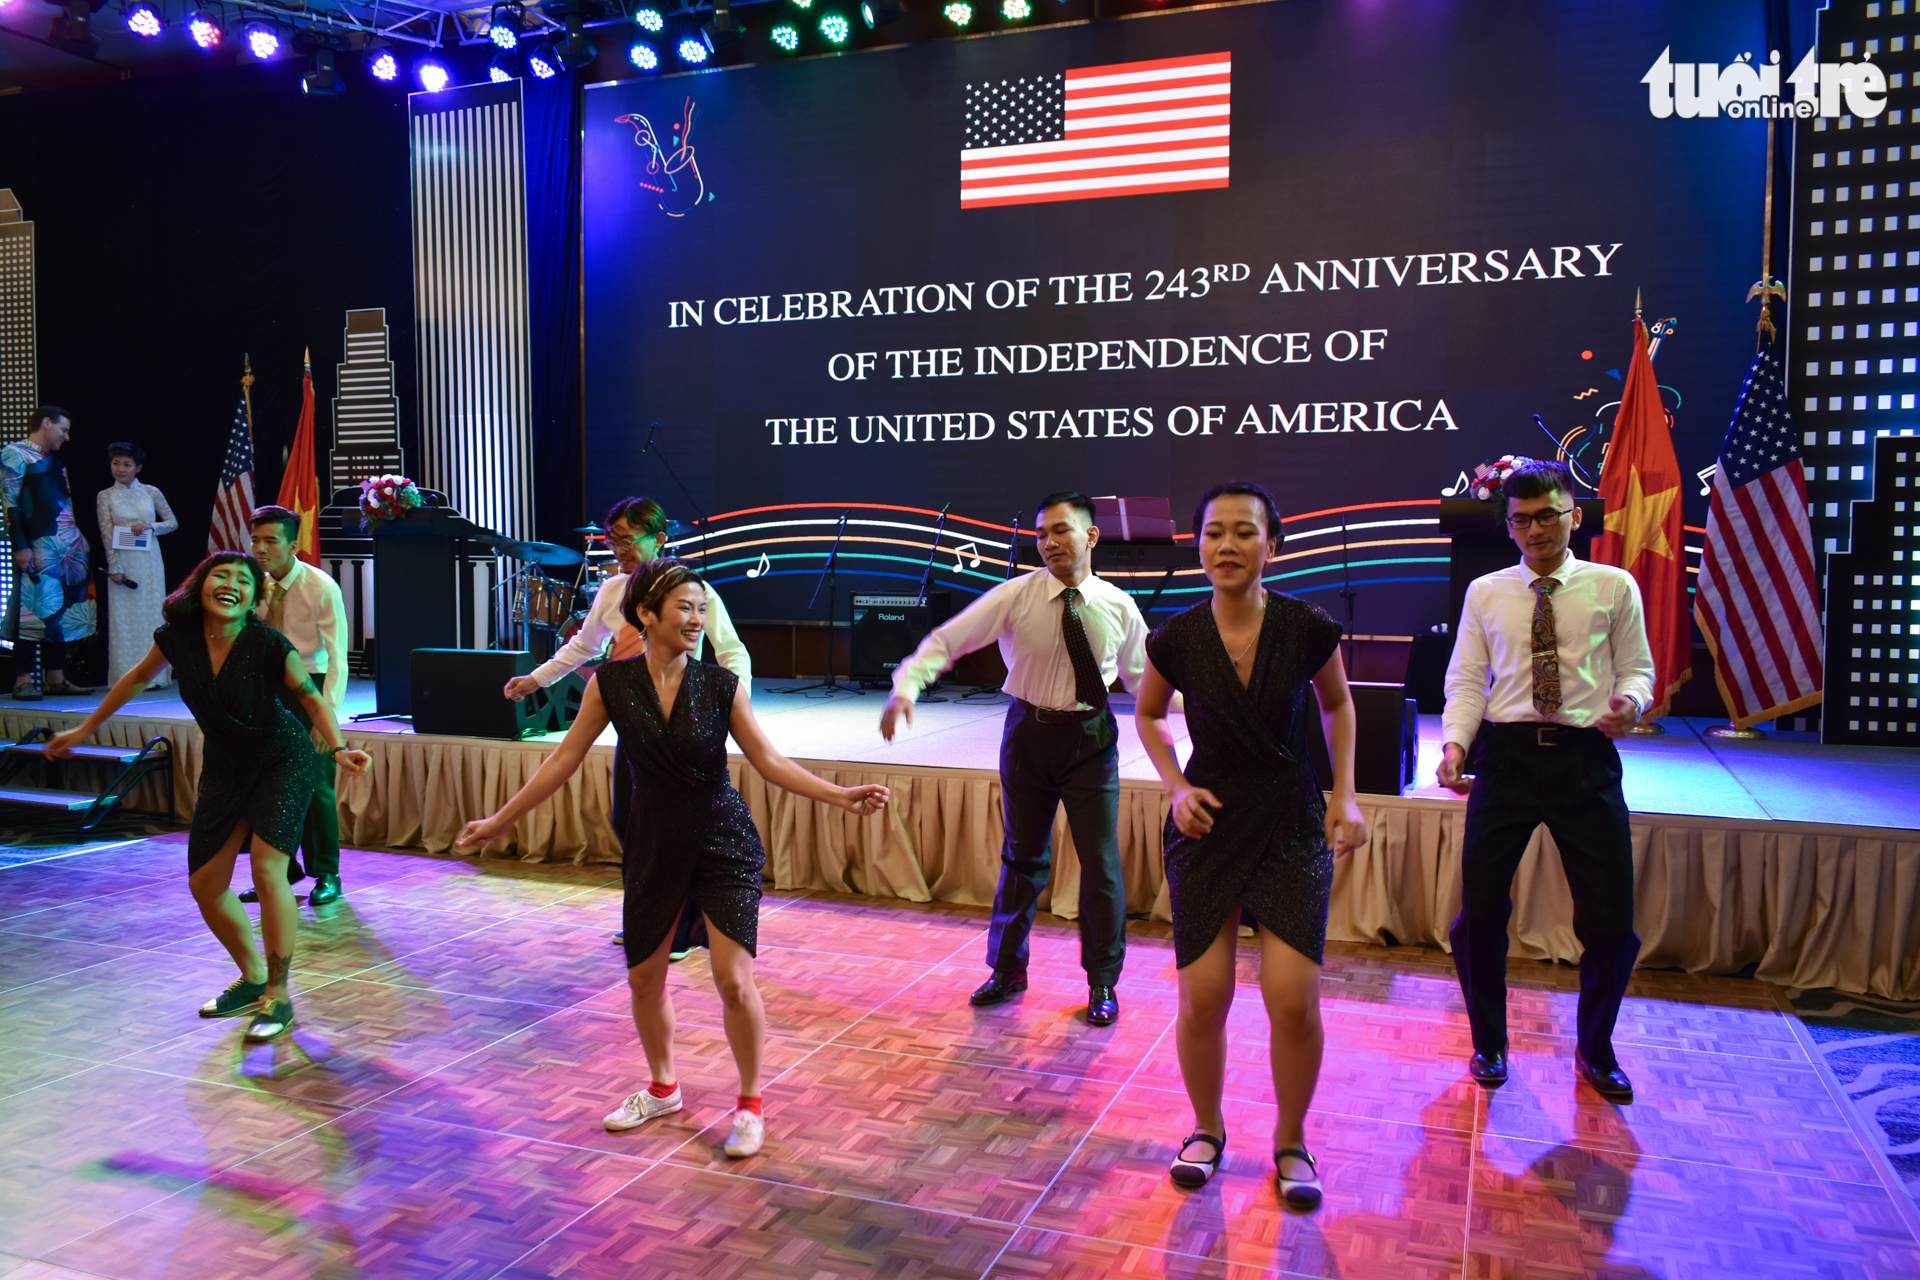 Vietnamese dance crew Saigon Swing Cats perform at an event celebrating the 243rd U.S. Independence Day in Ho Chi Minh City on June 5, 2019. Photo: Tuan Son / Tuoi Tre News